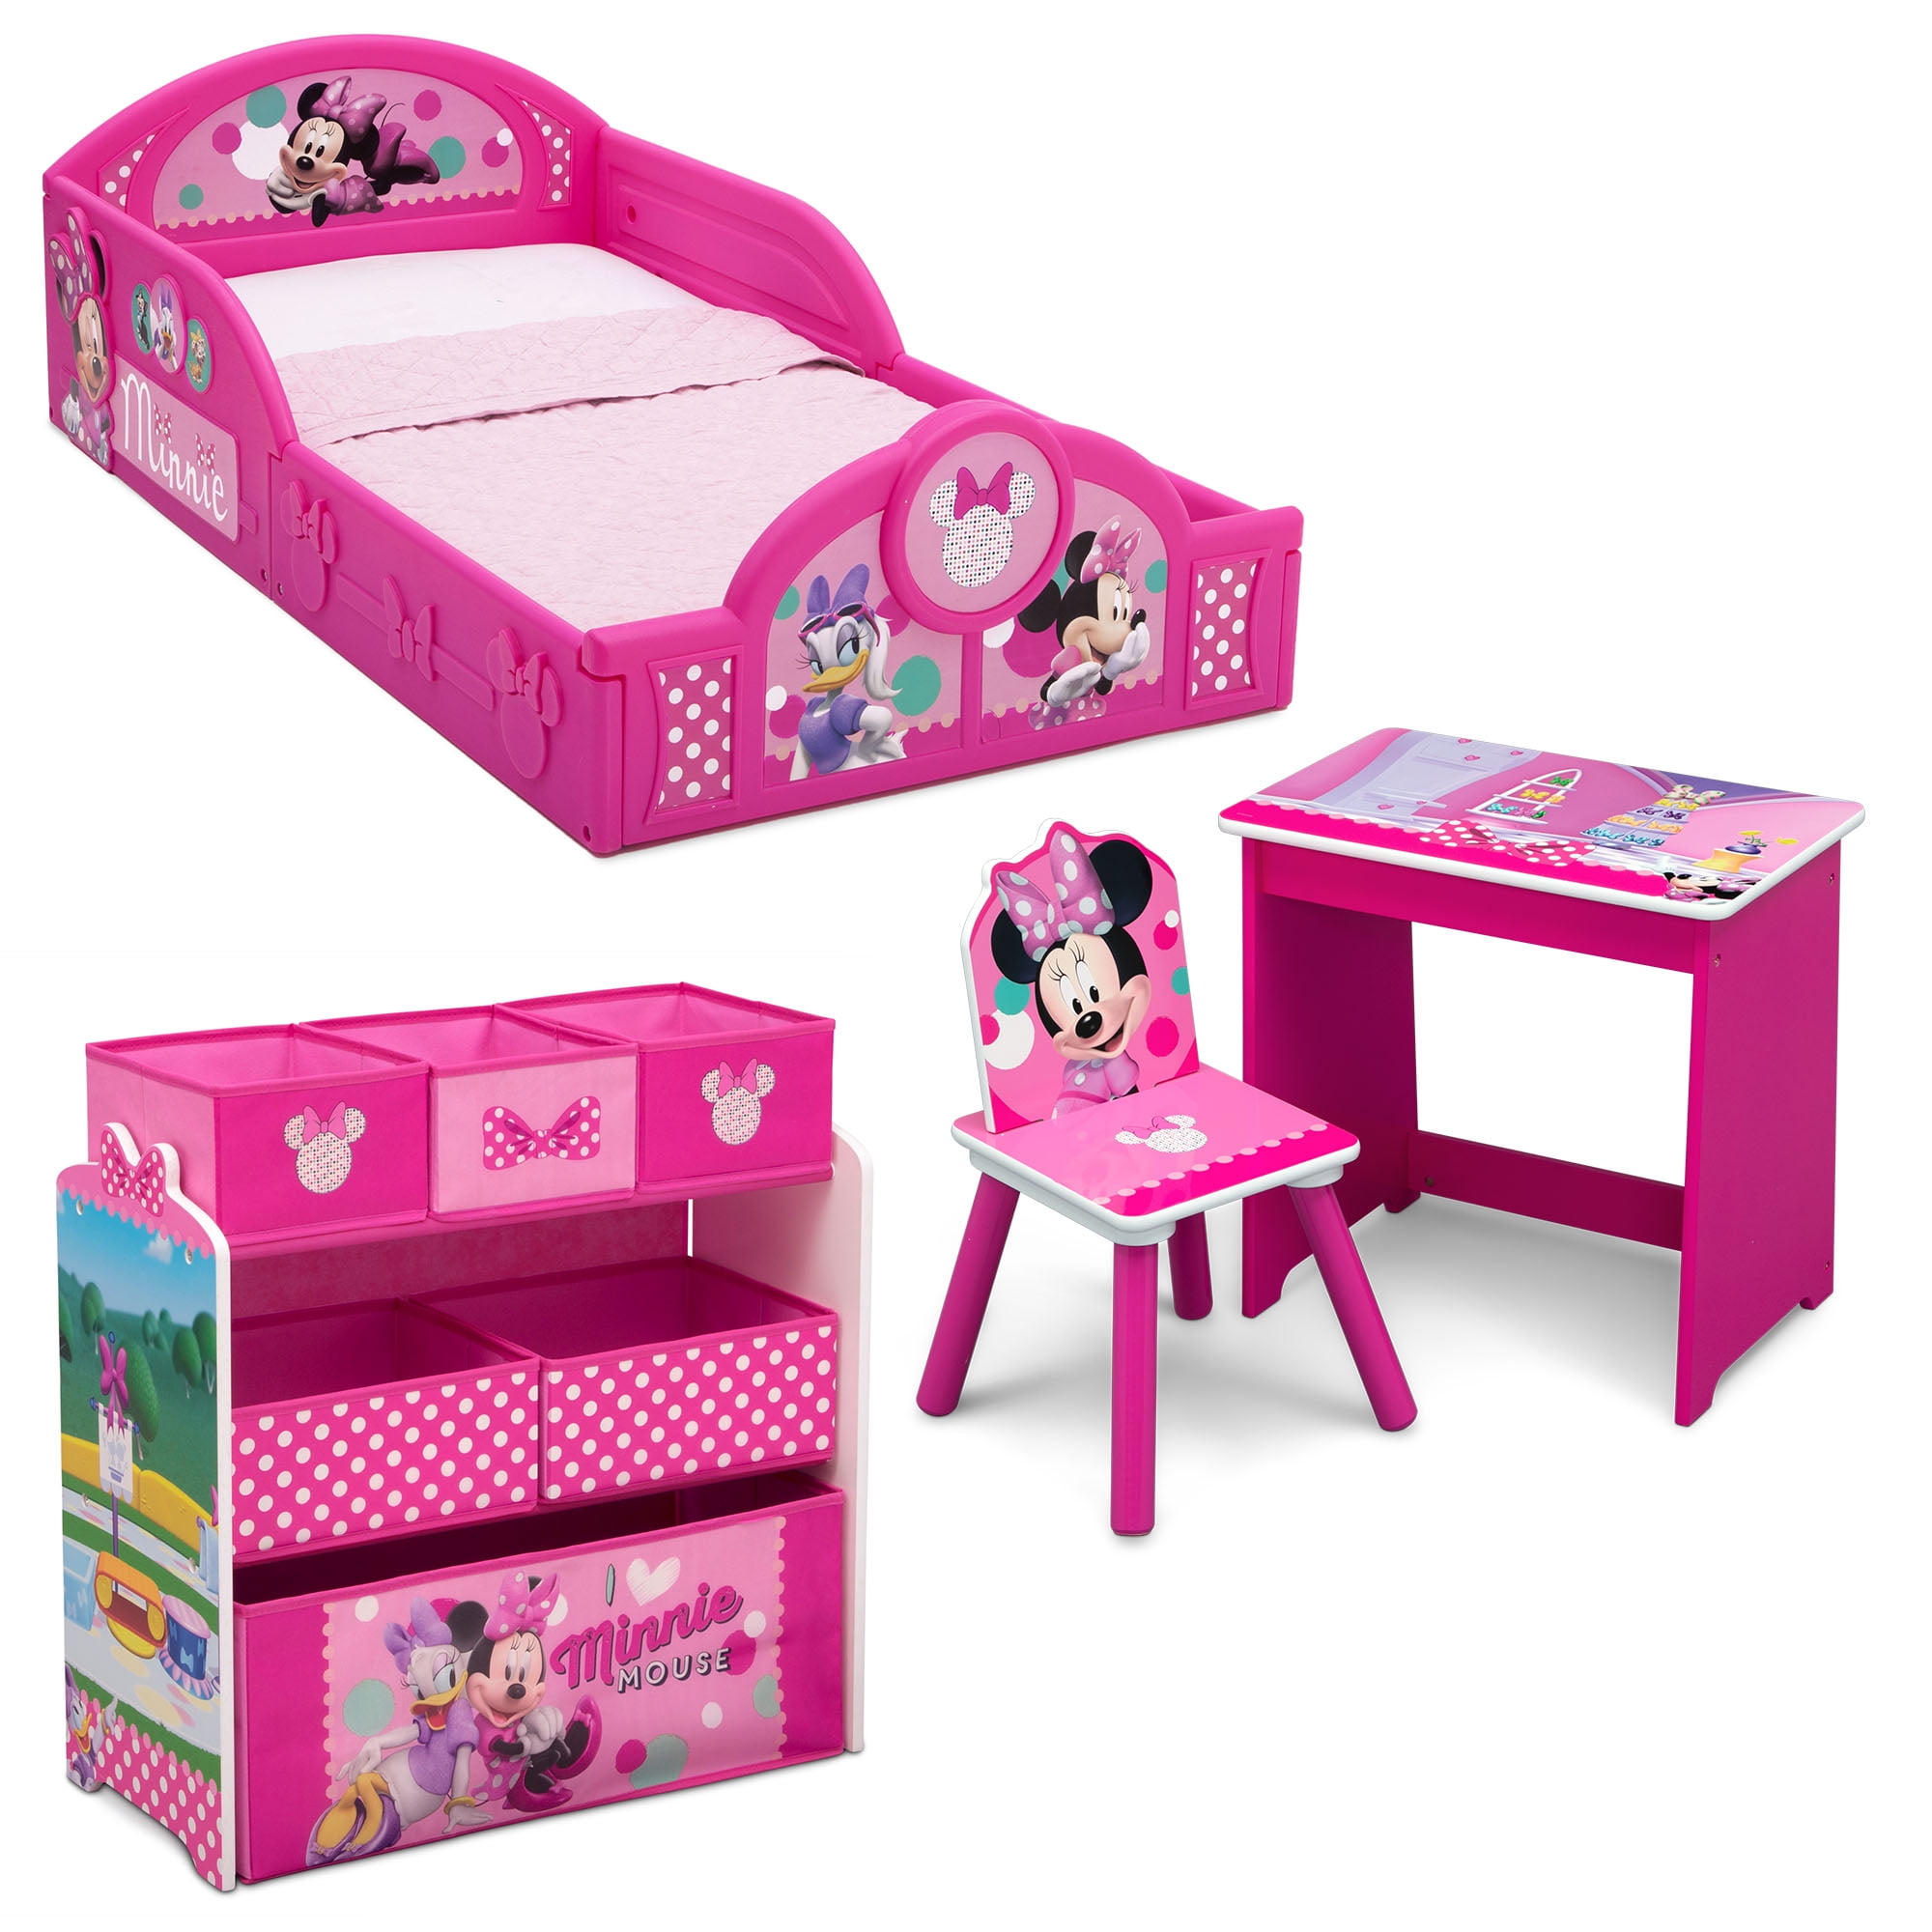 Minnie Mouse Storage Convertible Toy Box Desk Girls Kids Bedroom Furniture Pink 